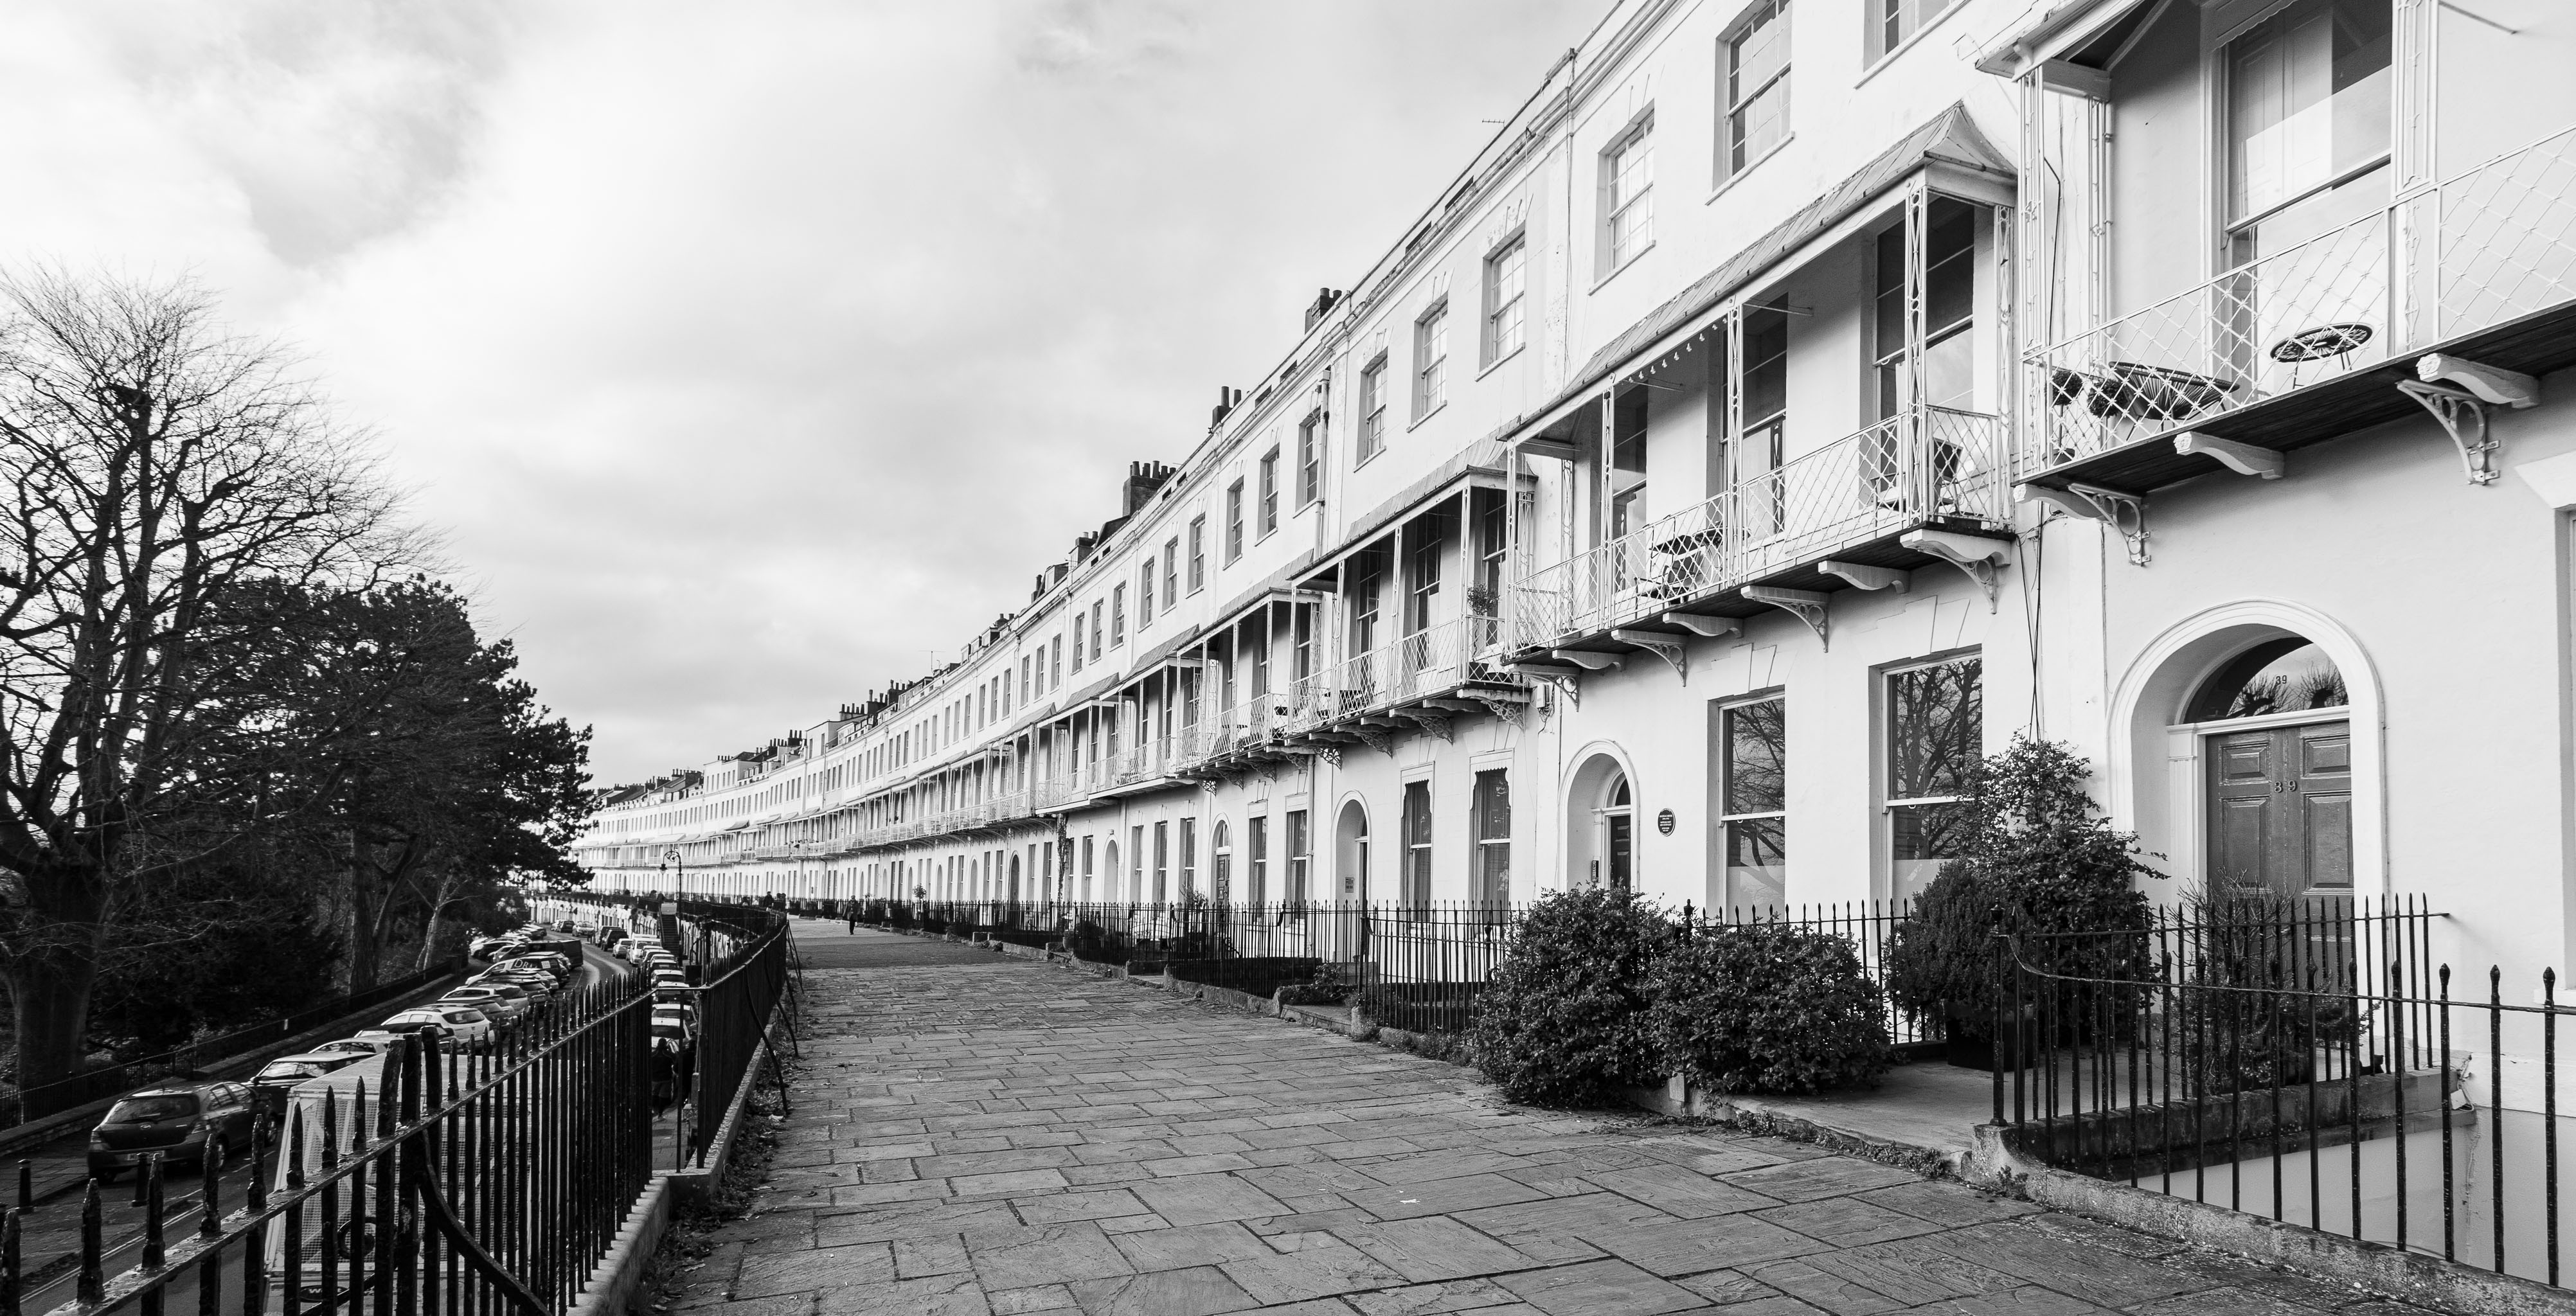 Royal York Crescent
I imagine, given the fifteen minute gap between the last photo and this one, that I clambered up as far as the delightful Foliage Cafe and shot thi...